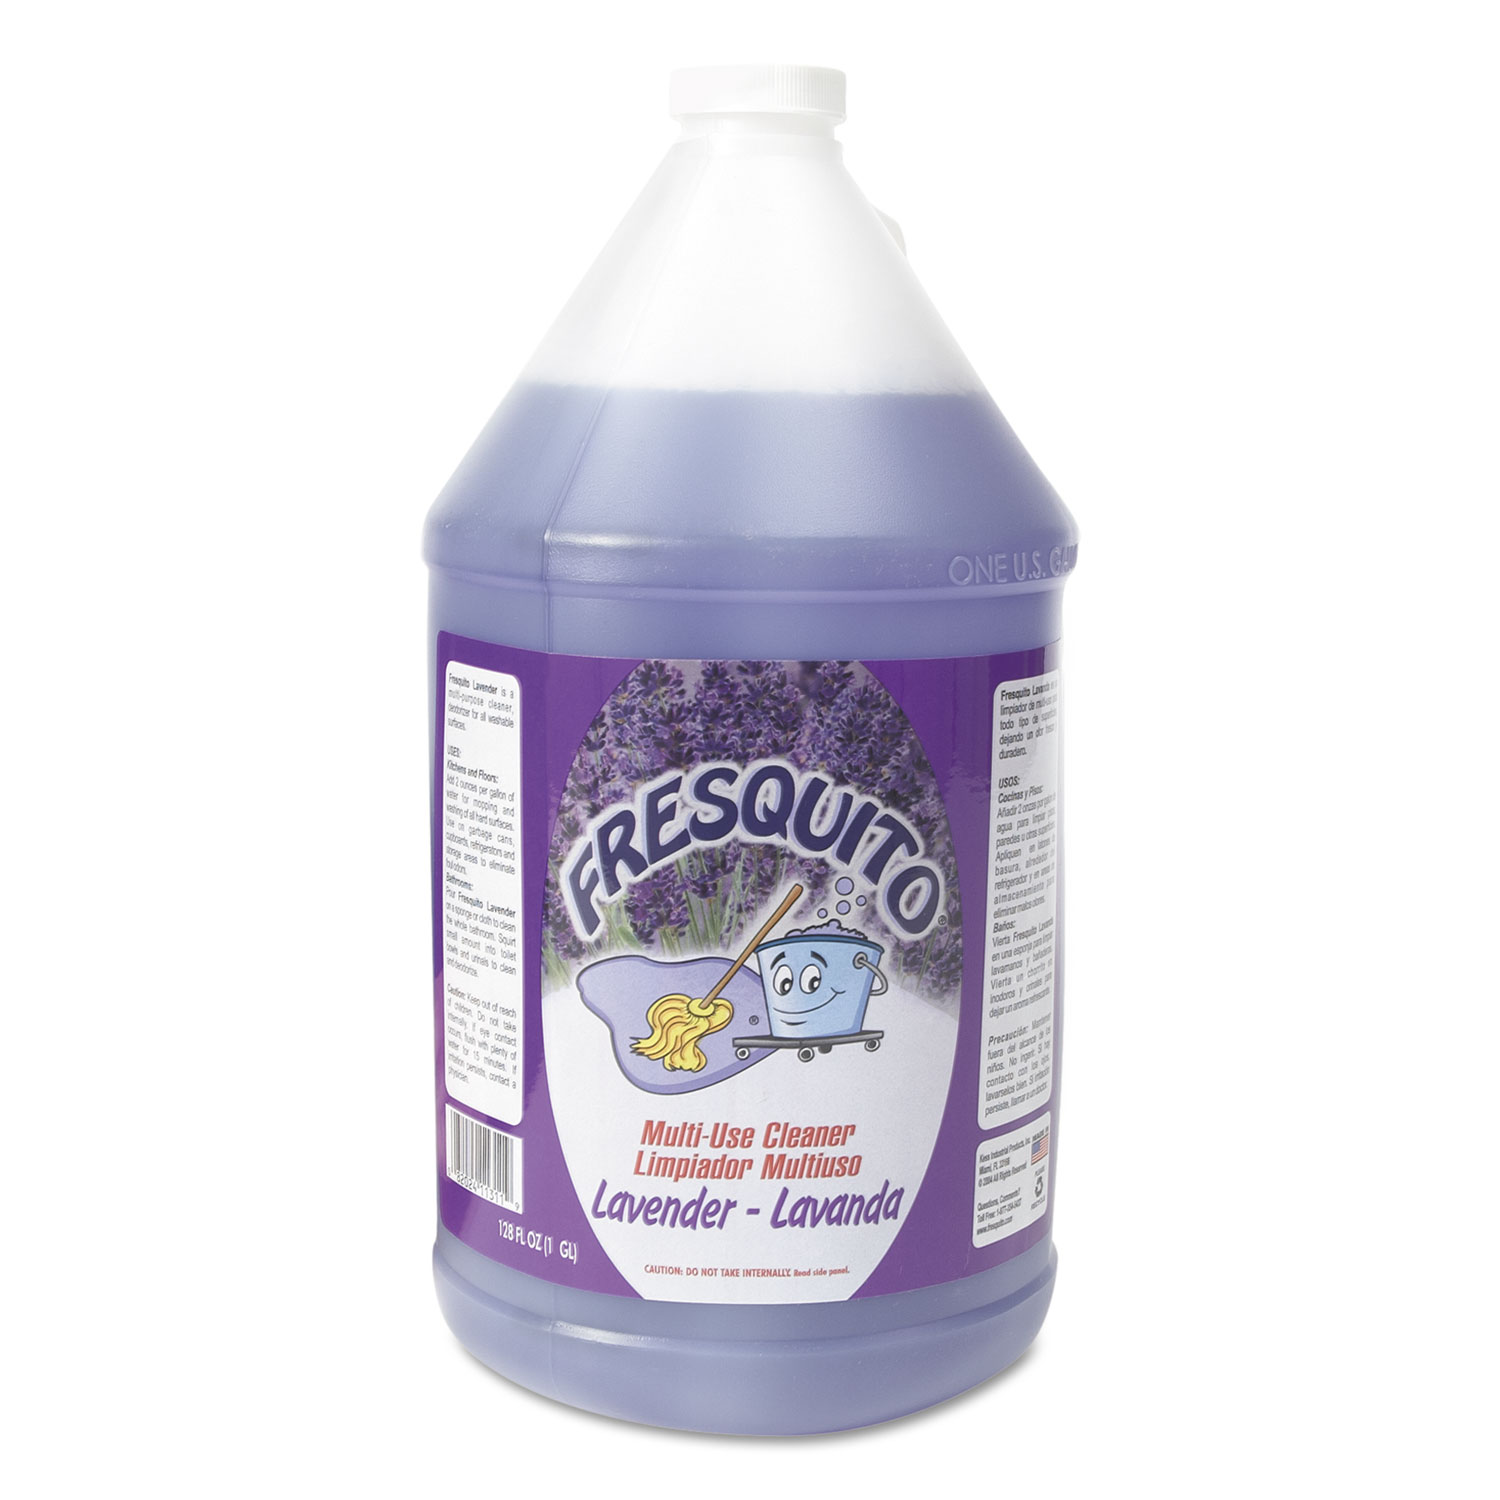  Fresquito FREQUITO-L Scented All-Purpose Cleaner, 1gal Bottle, Lavender Scent, 4/Carton (KESFRESQUITOL) 